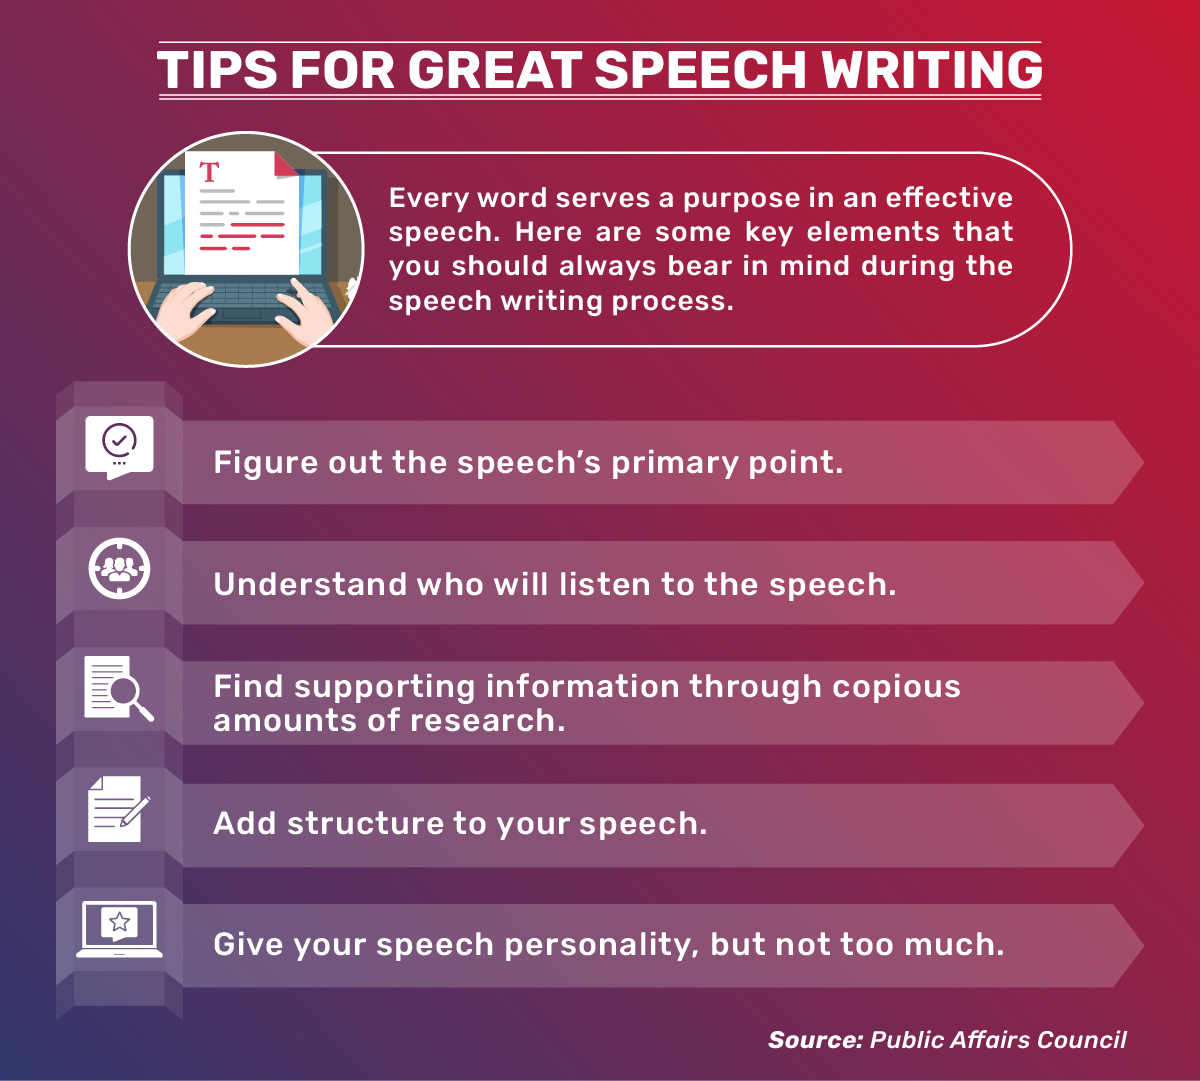 Key elements of writing a great speech include figuring out the speech’s primary point and understanding the audience.